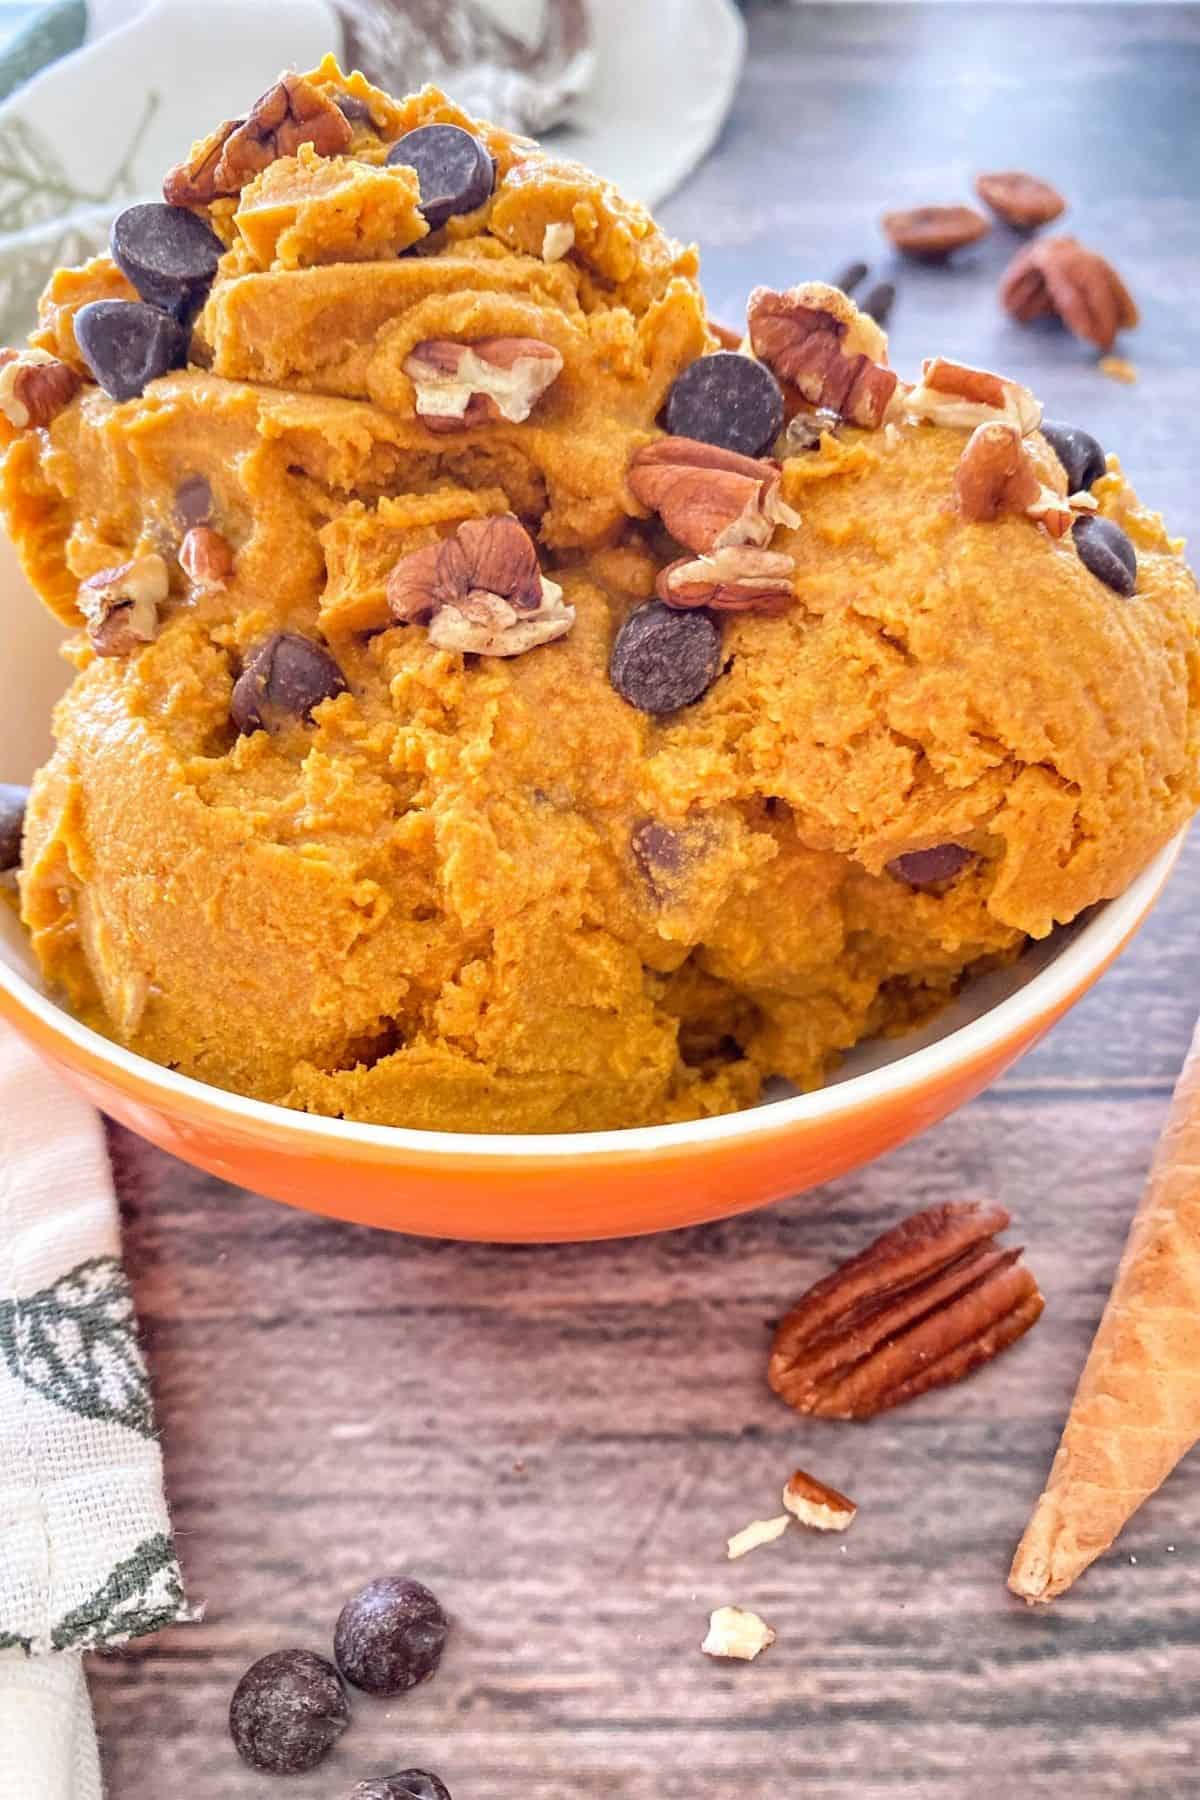 Scoops of pumpkin ice cream in bowl with pecans and chocolate chips on top.